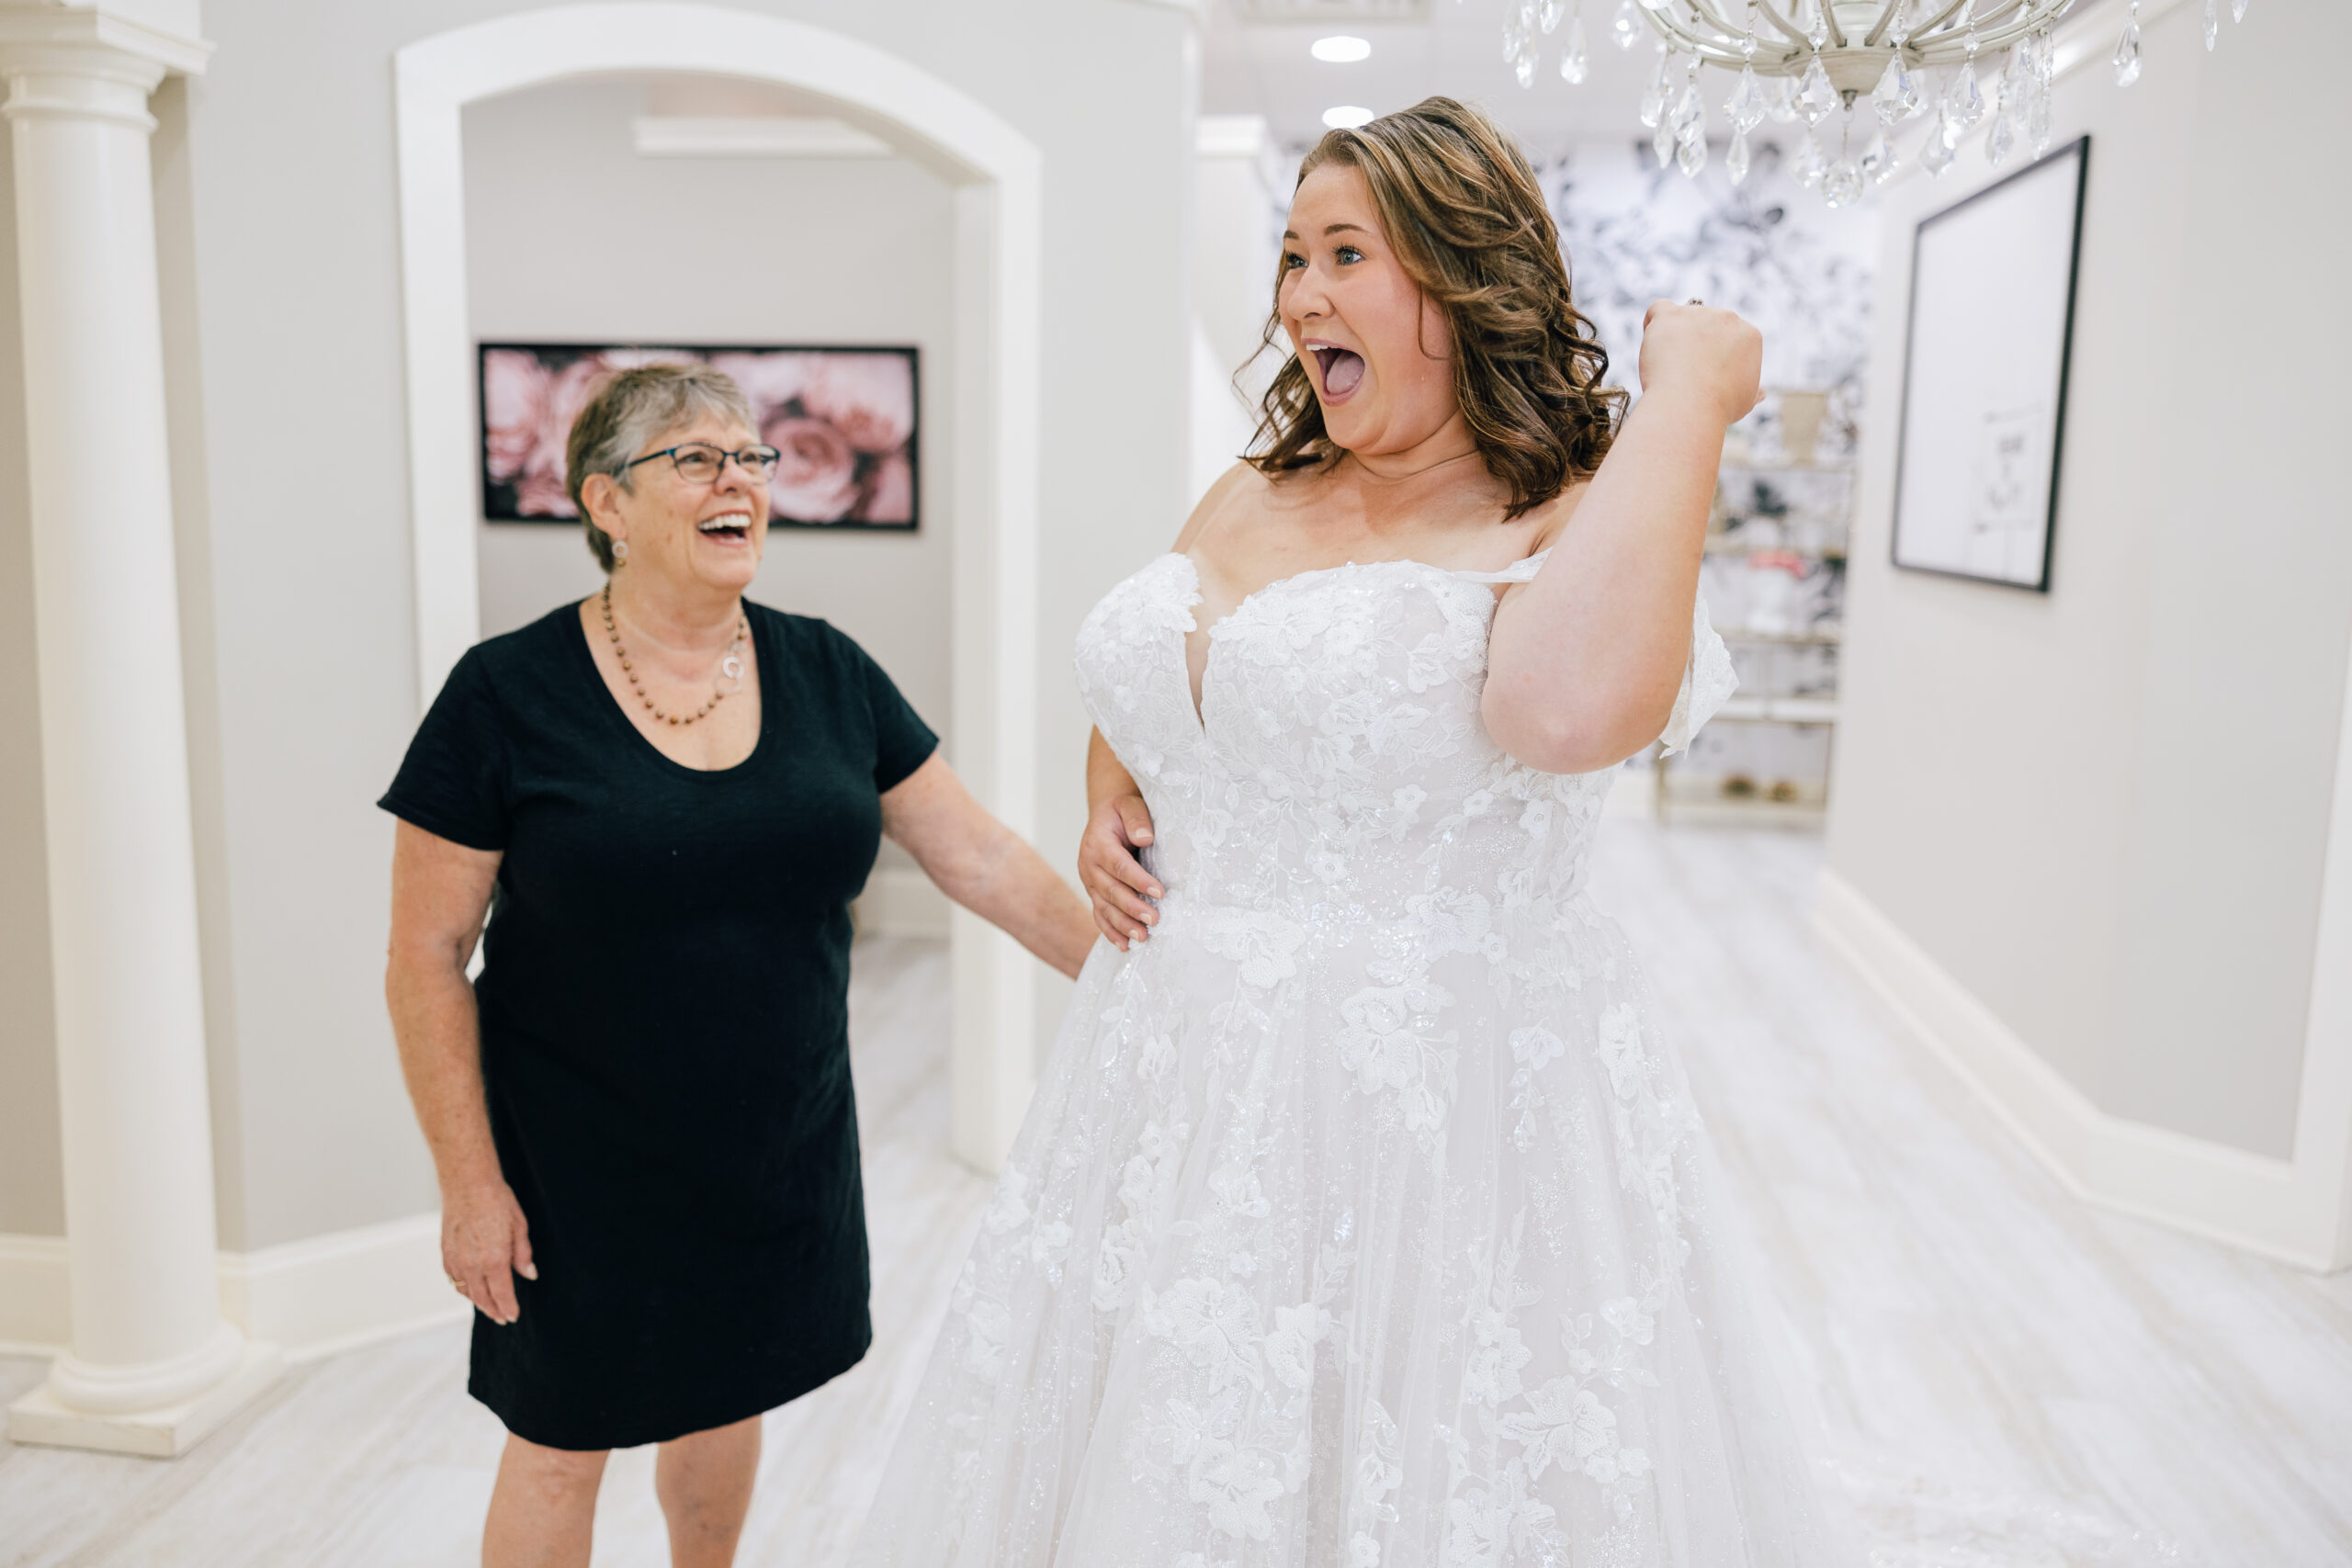 ecstatic bride wearing white bridal gown